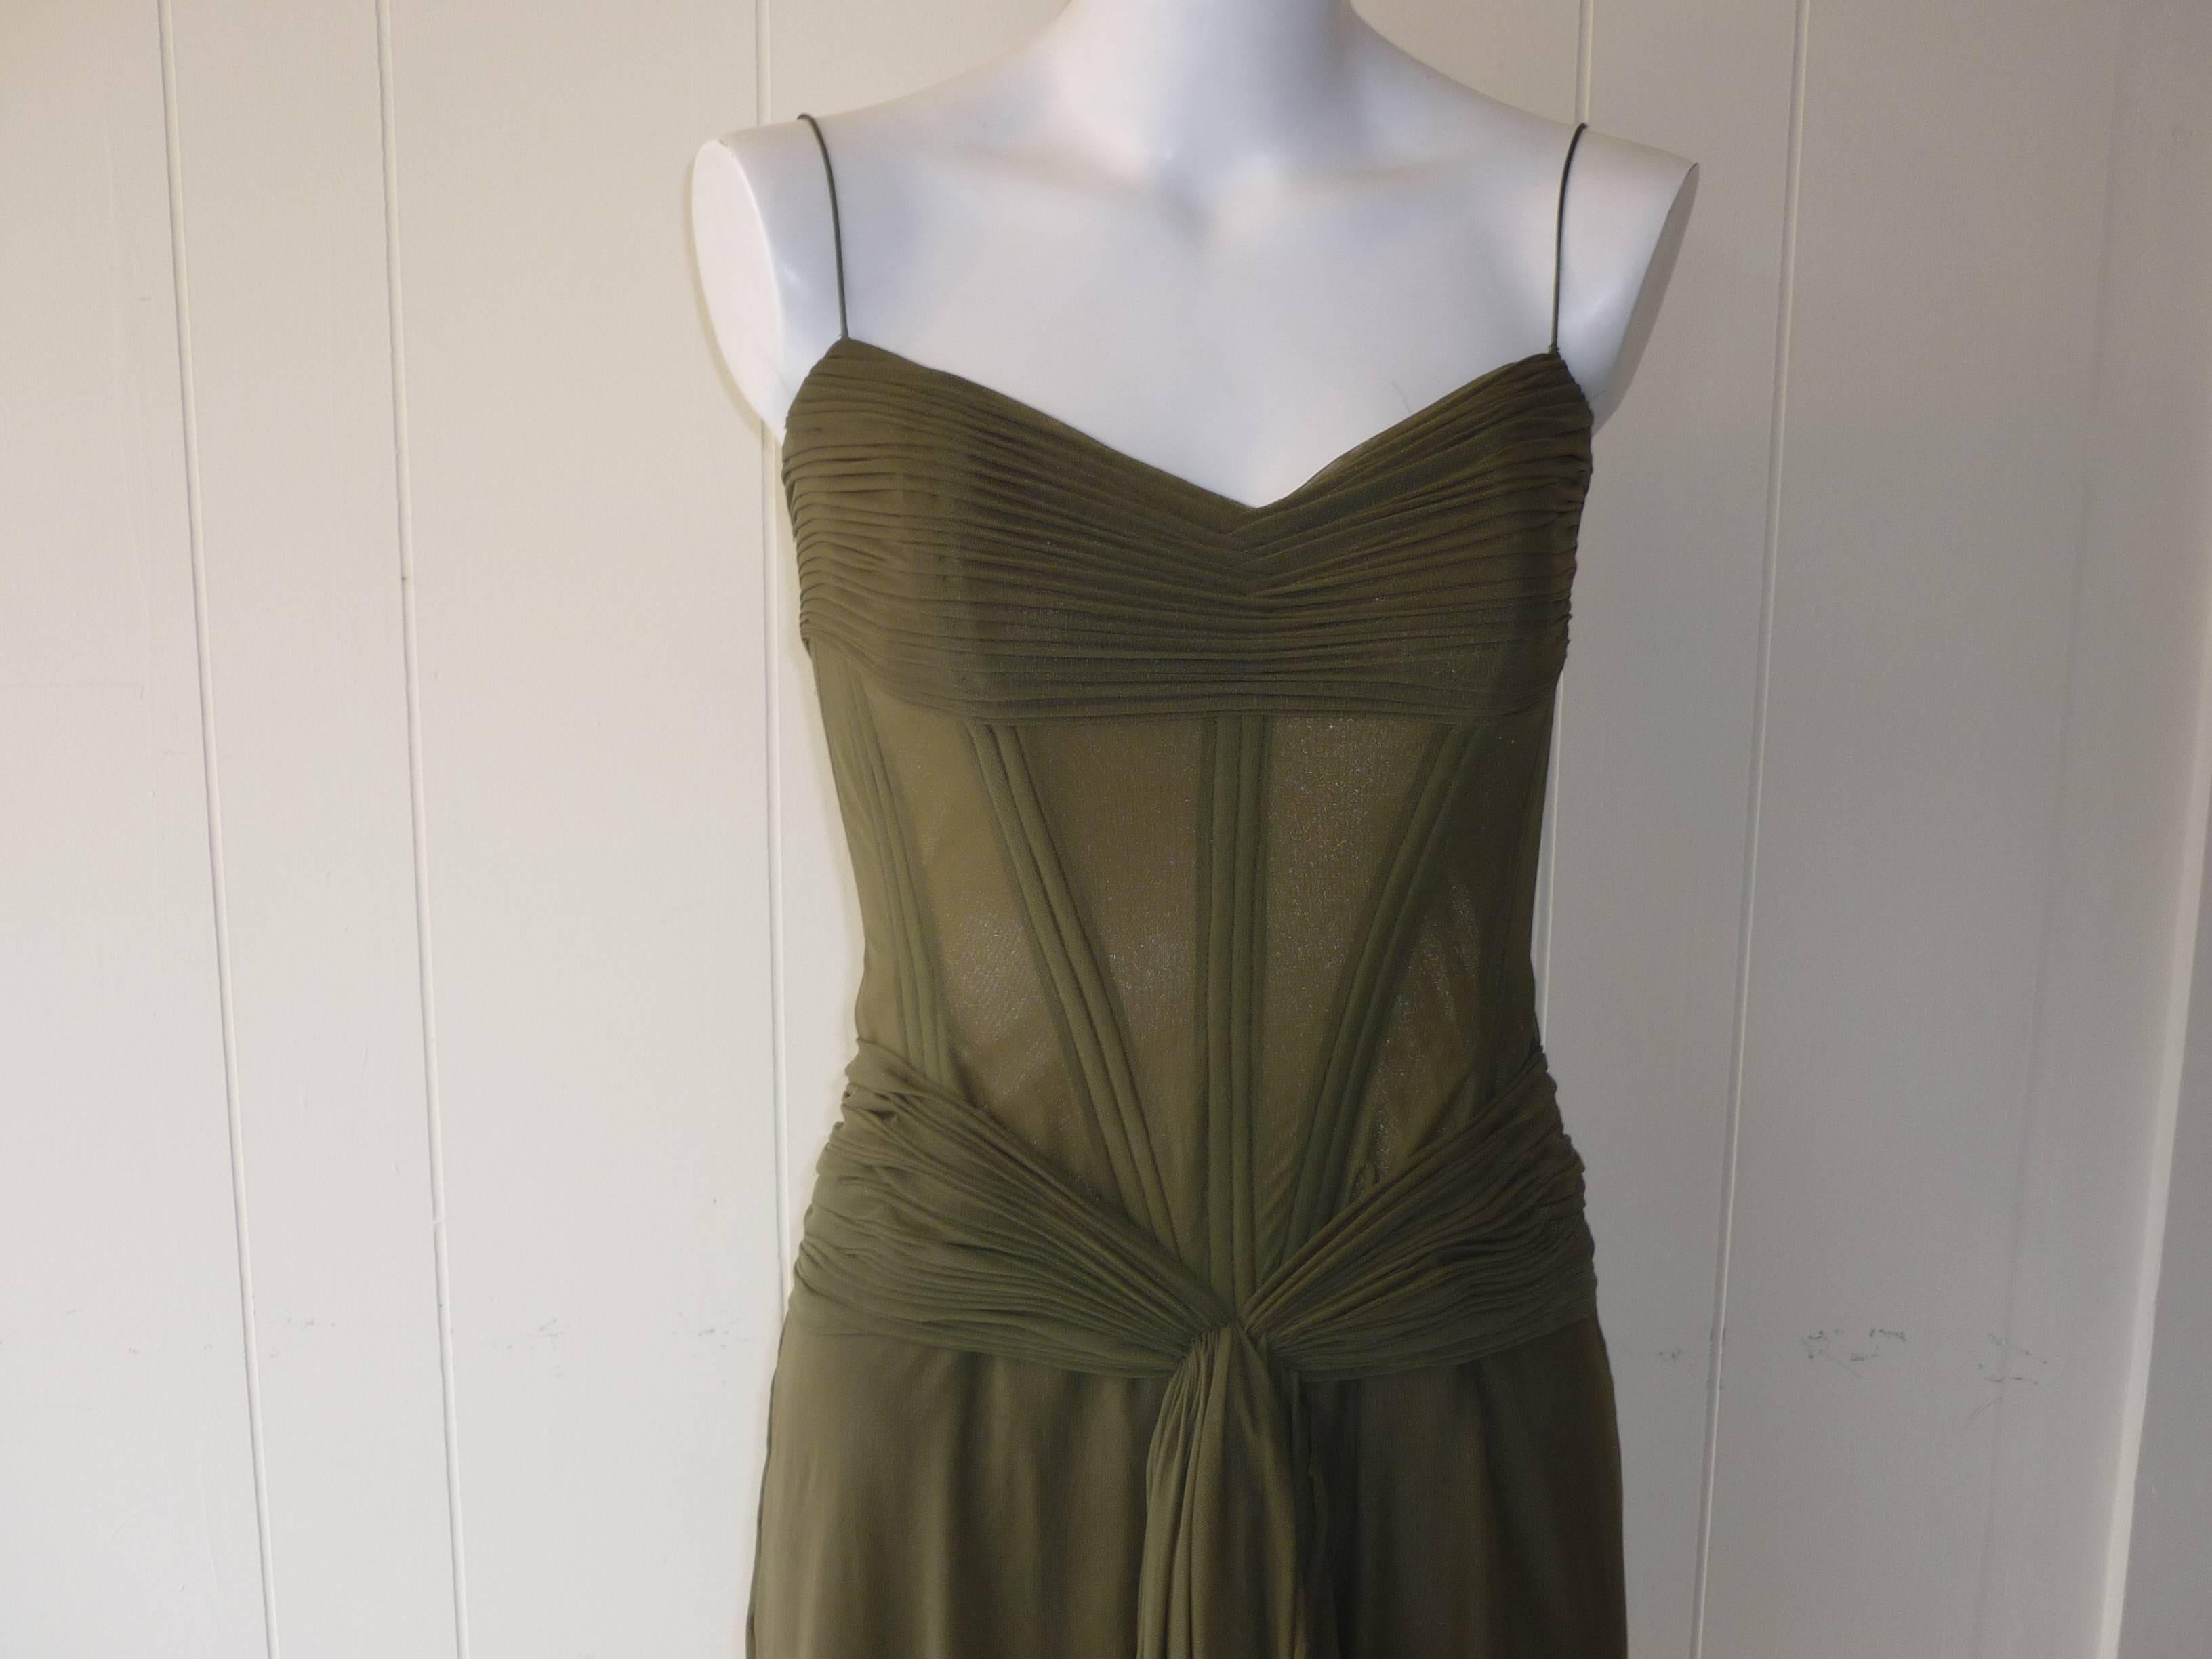 Beautiful pleated corset drapedand ruched dress. The bodice is fully line for support and there are stays (boning) from the top to the waist.